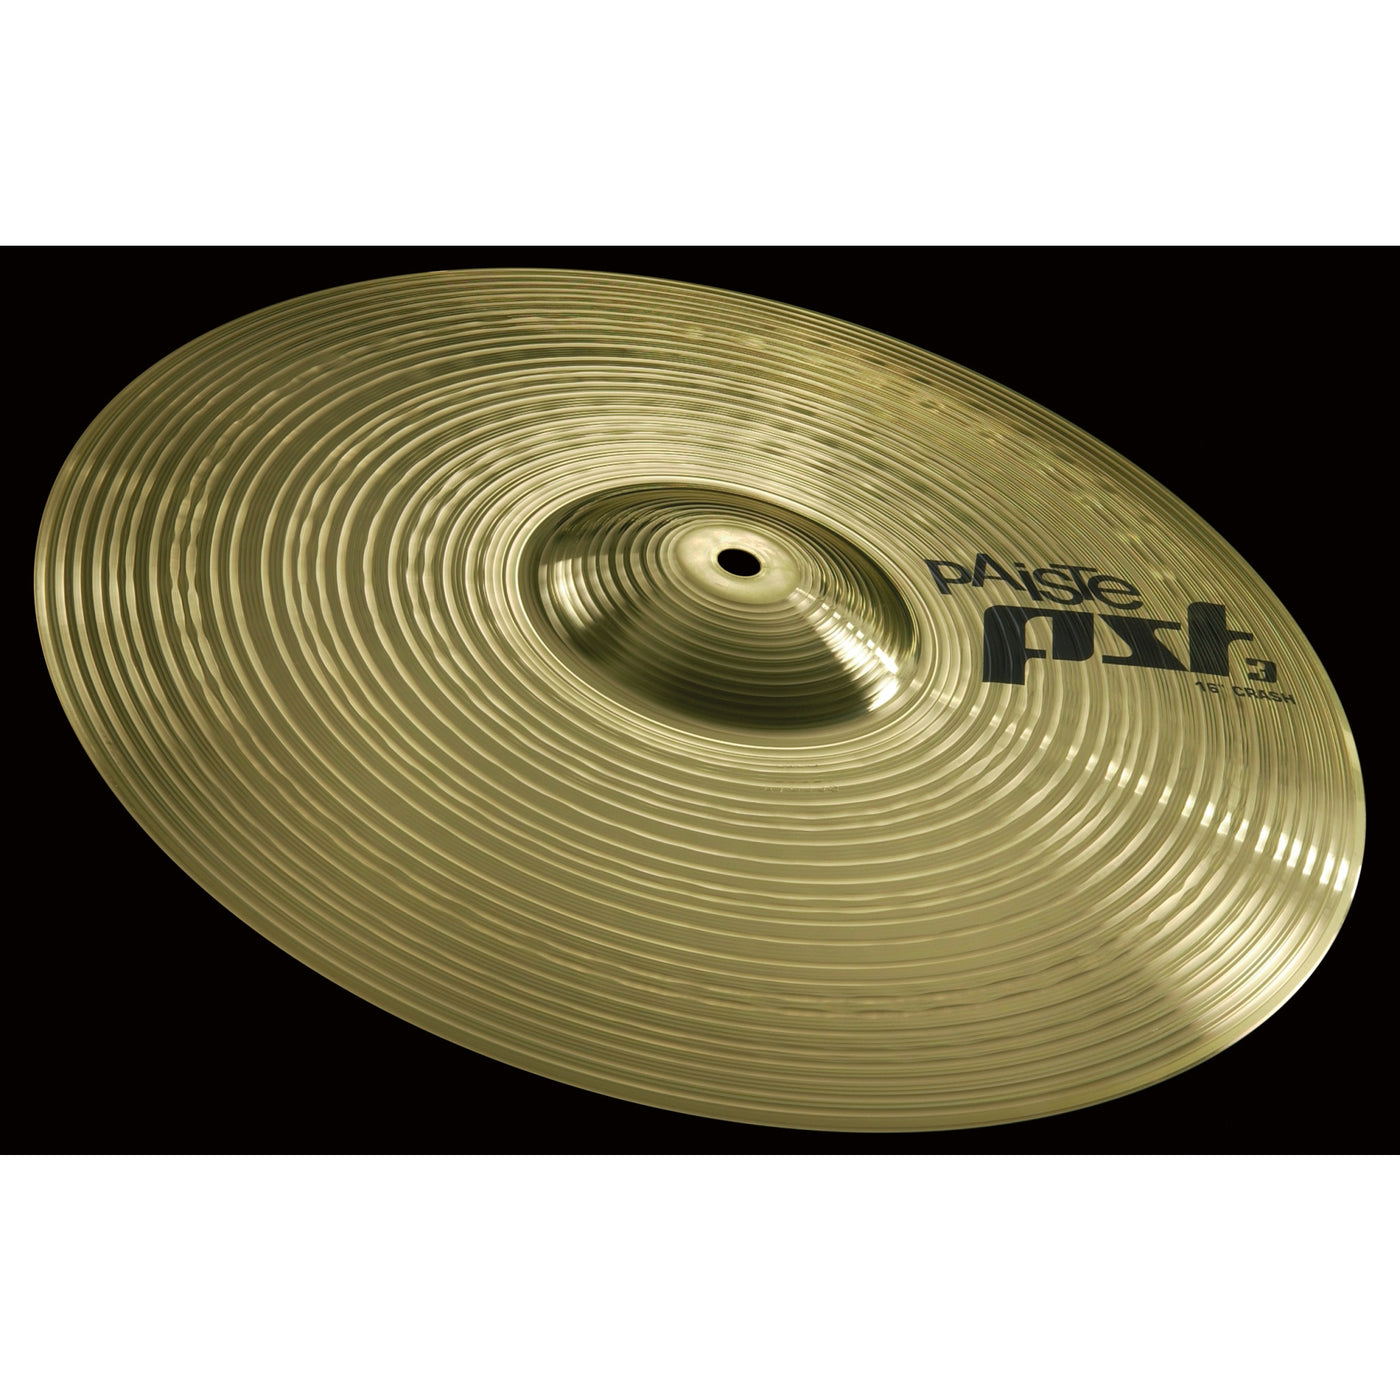 Paiste Crash Cymbal, PST 3 Series, Percussion Instrument for Drums, 16"